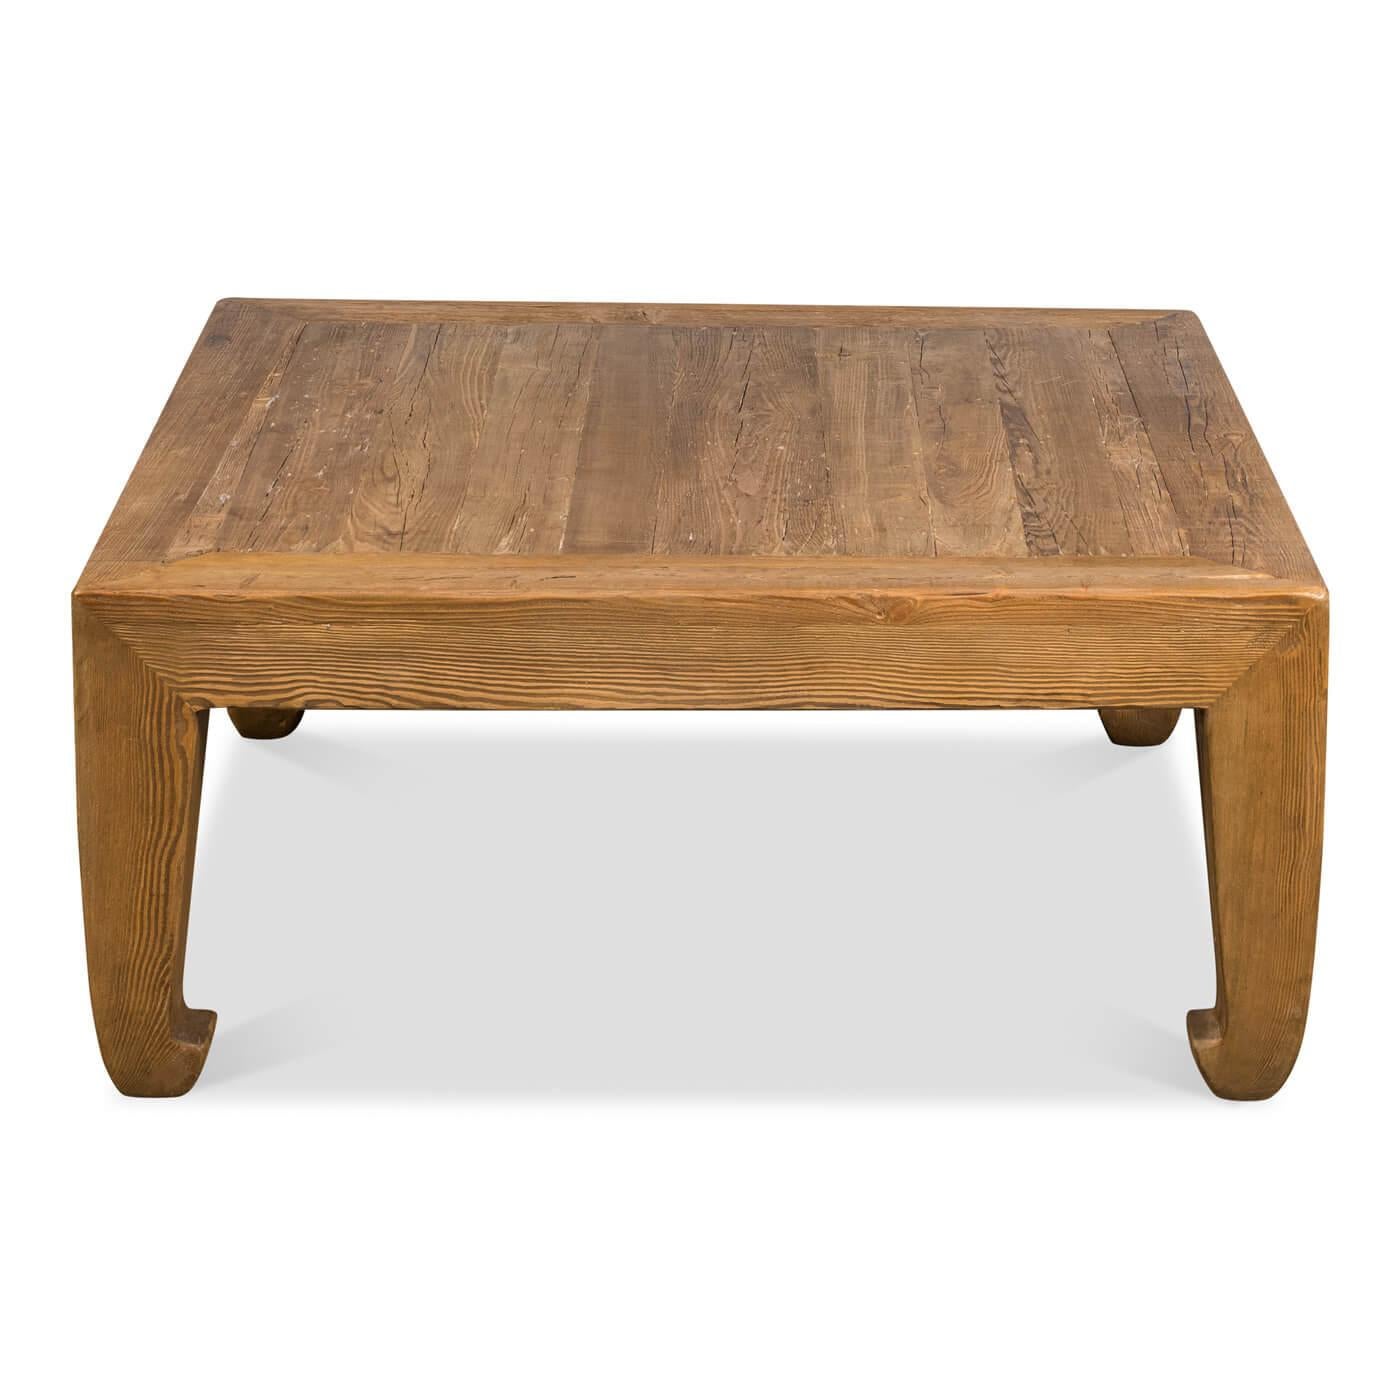 Asian-style square coffee table of reclaimed pine, a classic style inspired by the far east. This table is a square shape with horse hoof-style legs, a design that dates back to the 14th century. 

Dimensions: 39